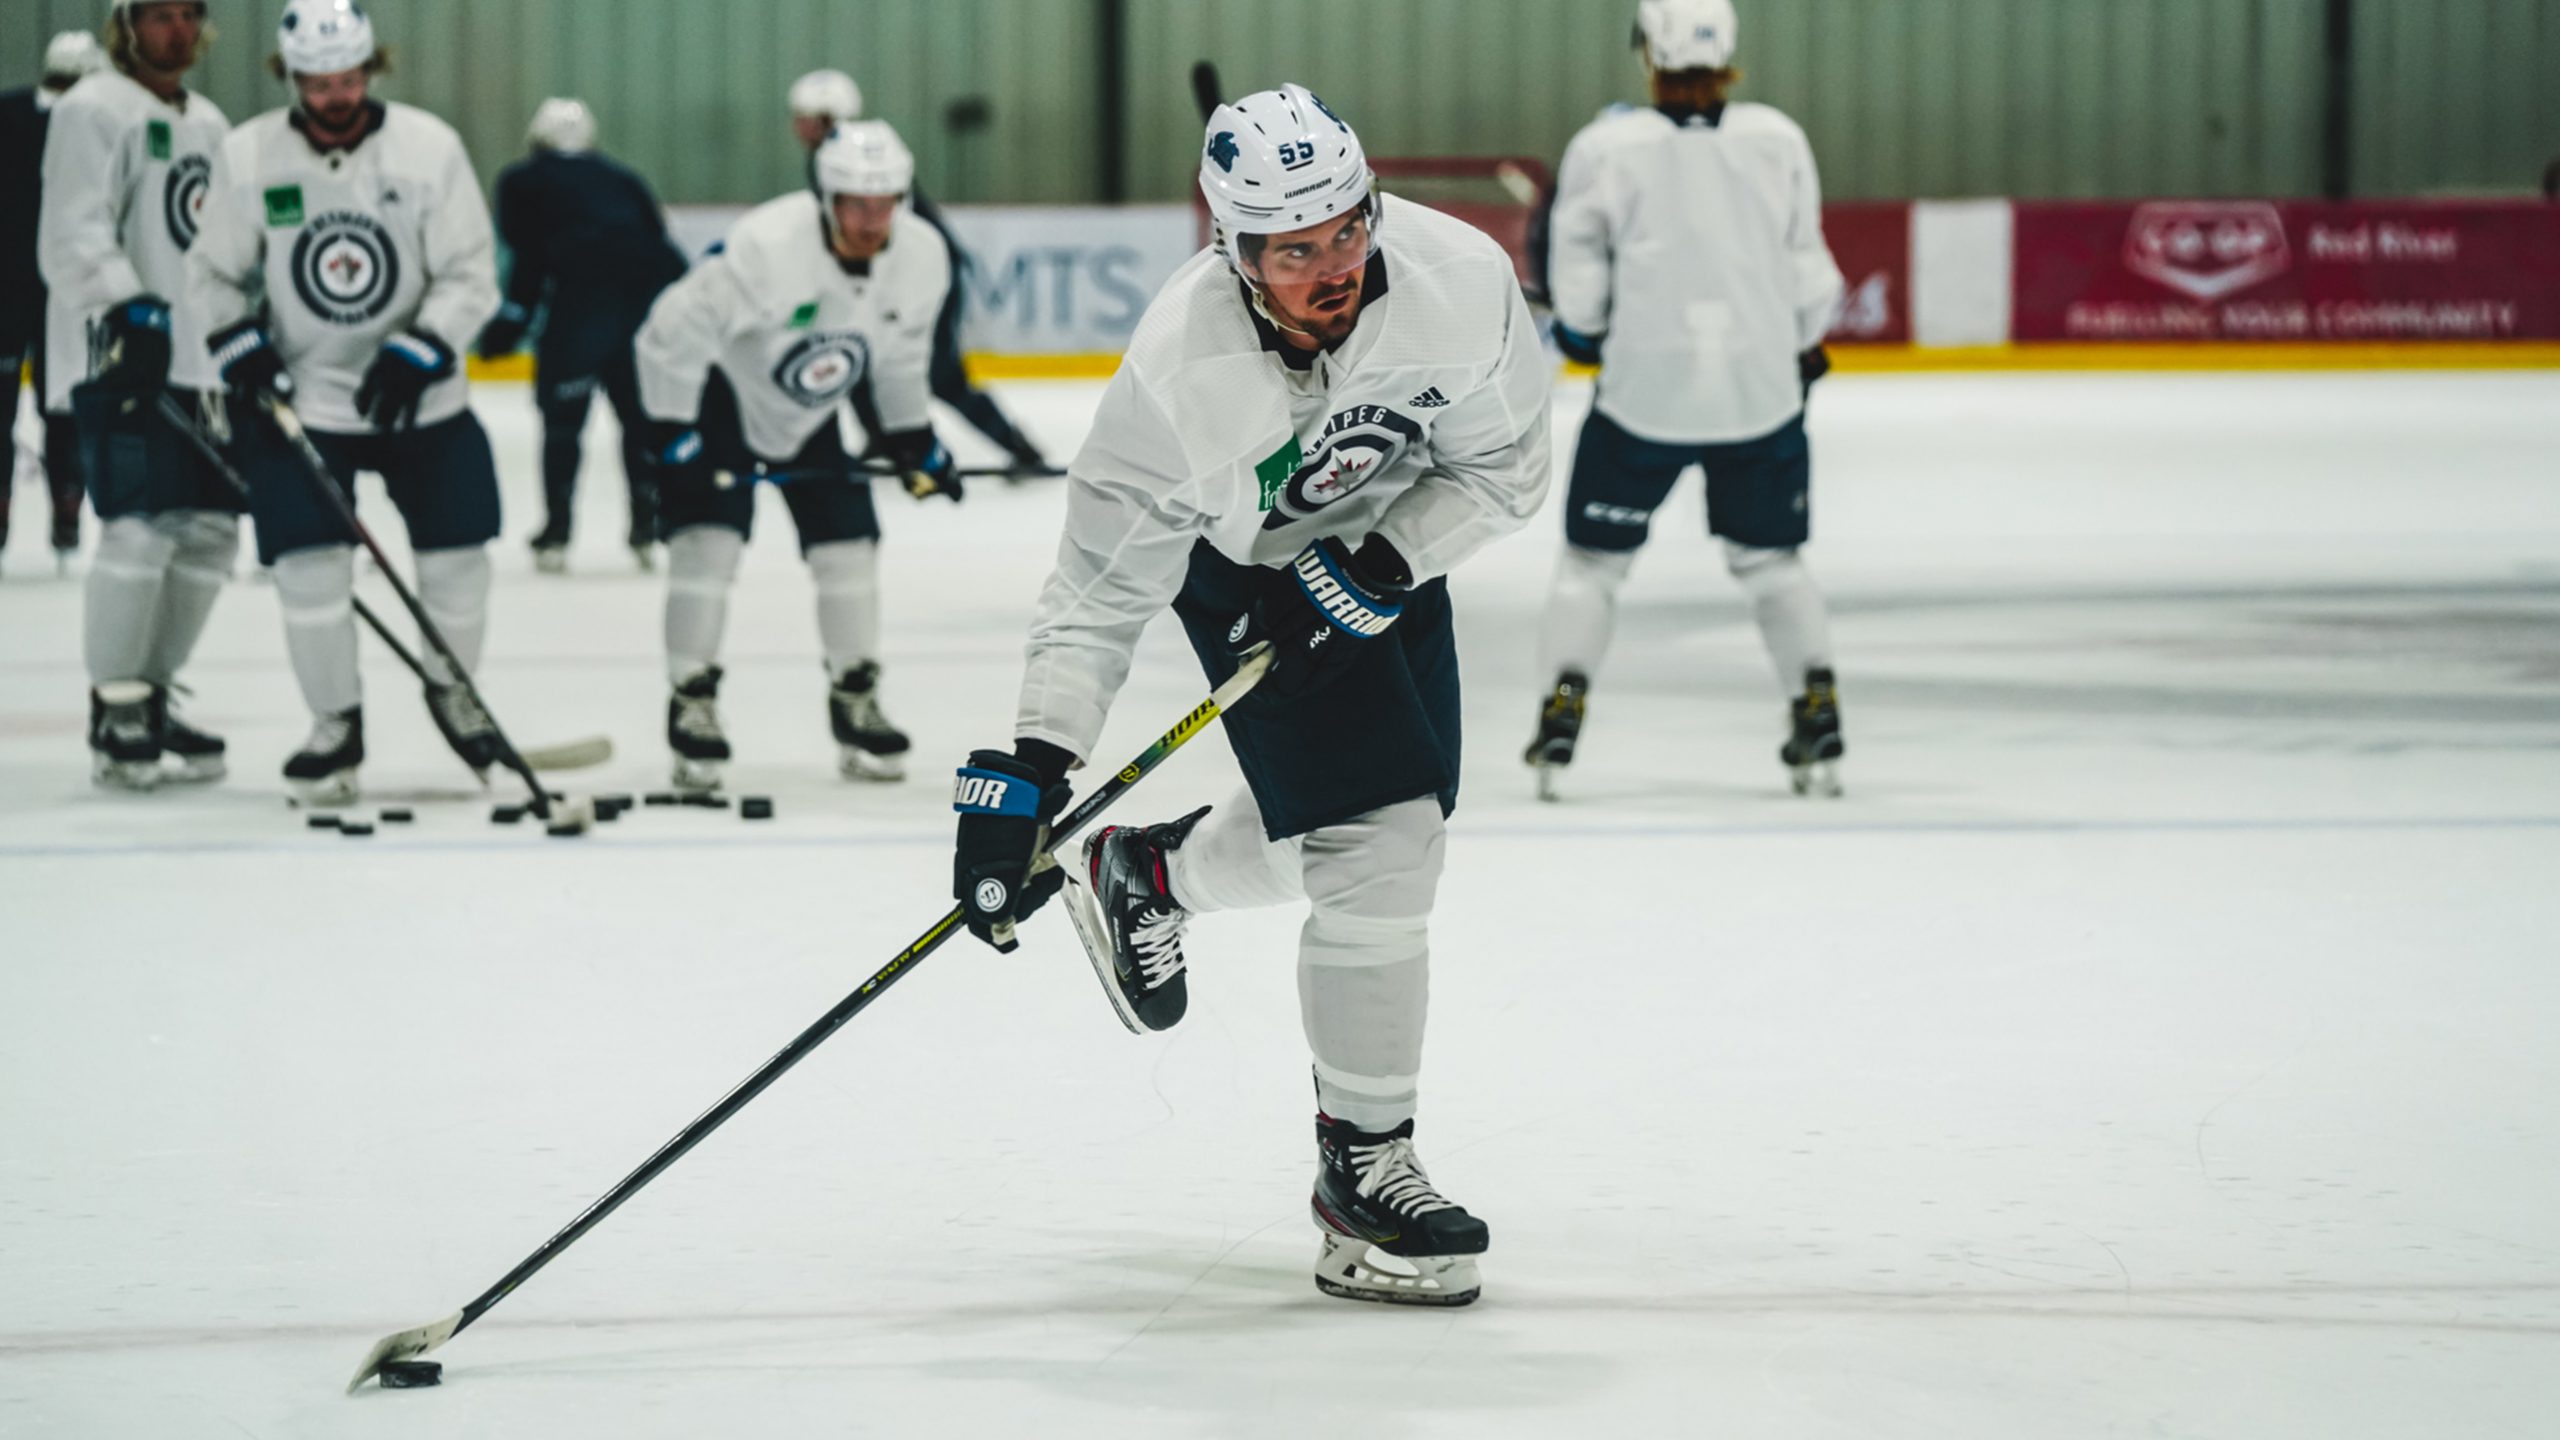 Mark Scheifele shooting at training camp by Tyler Esqivel scaled